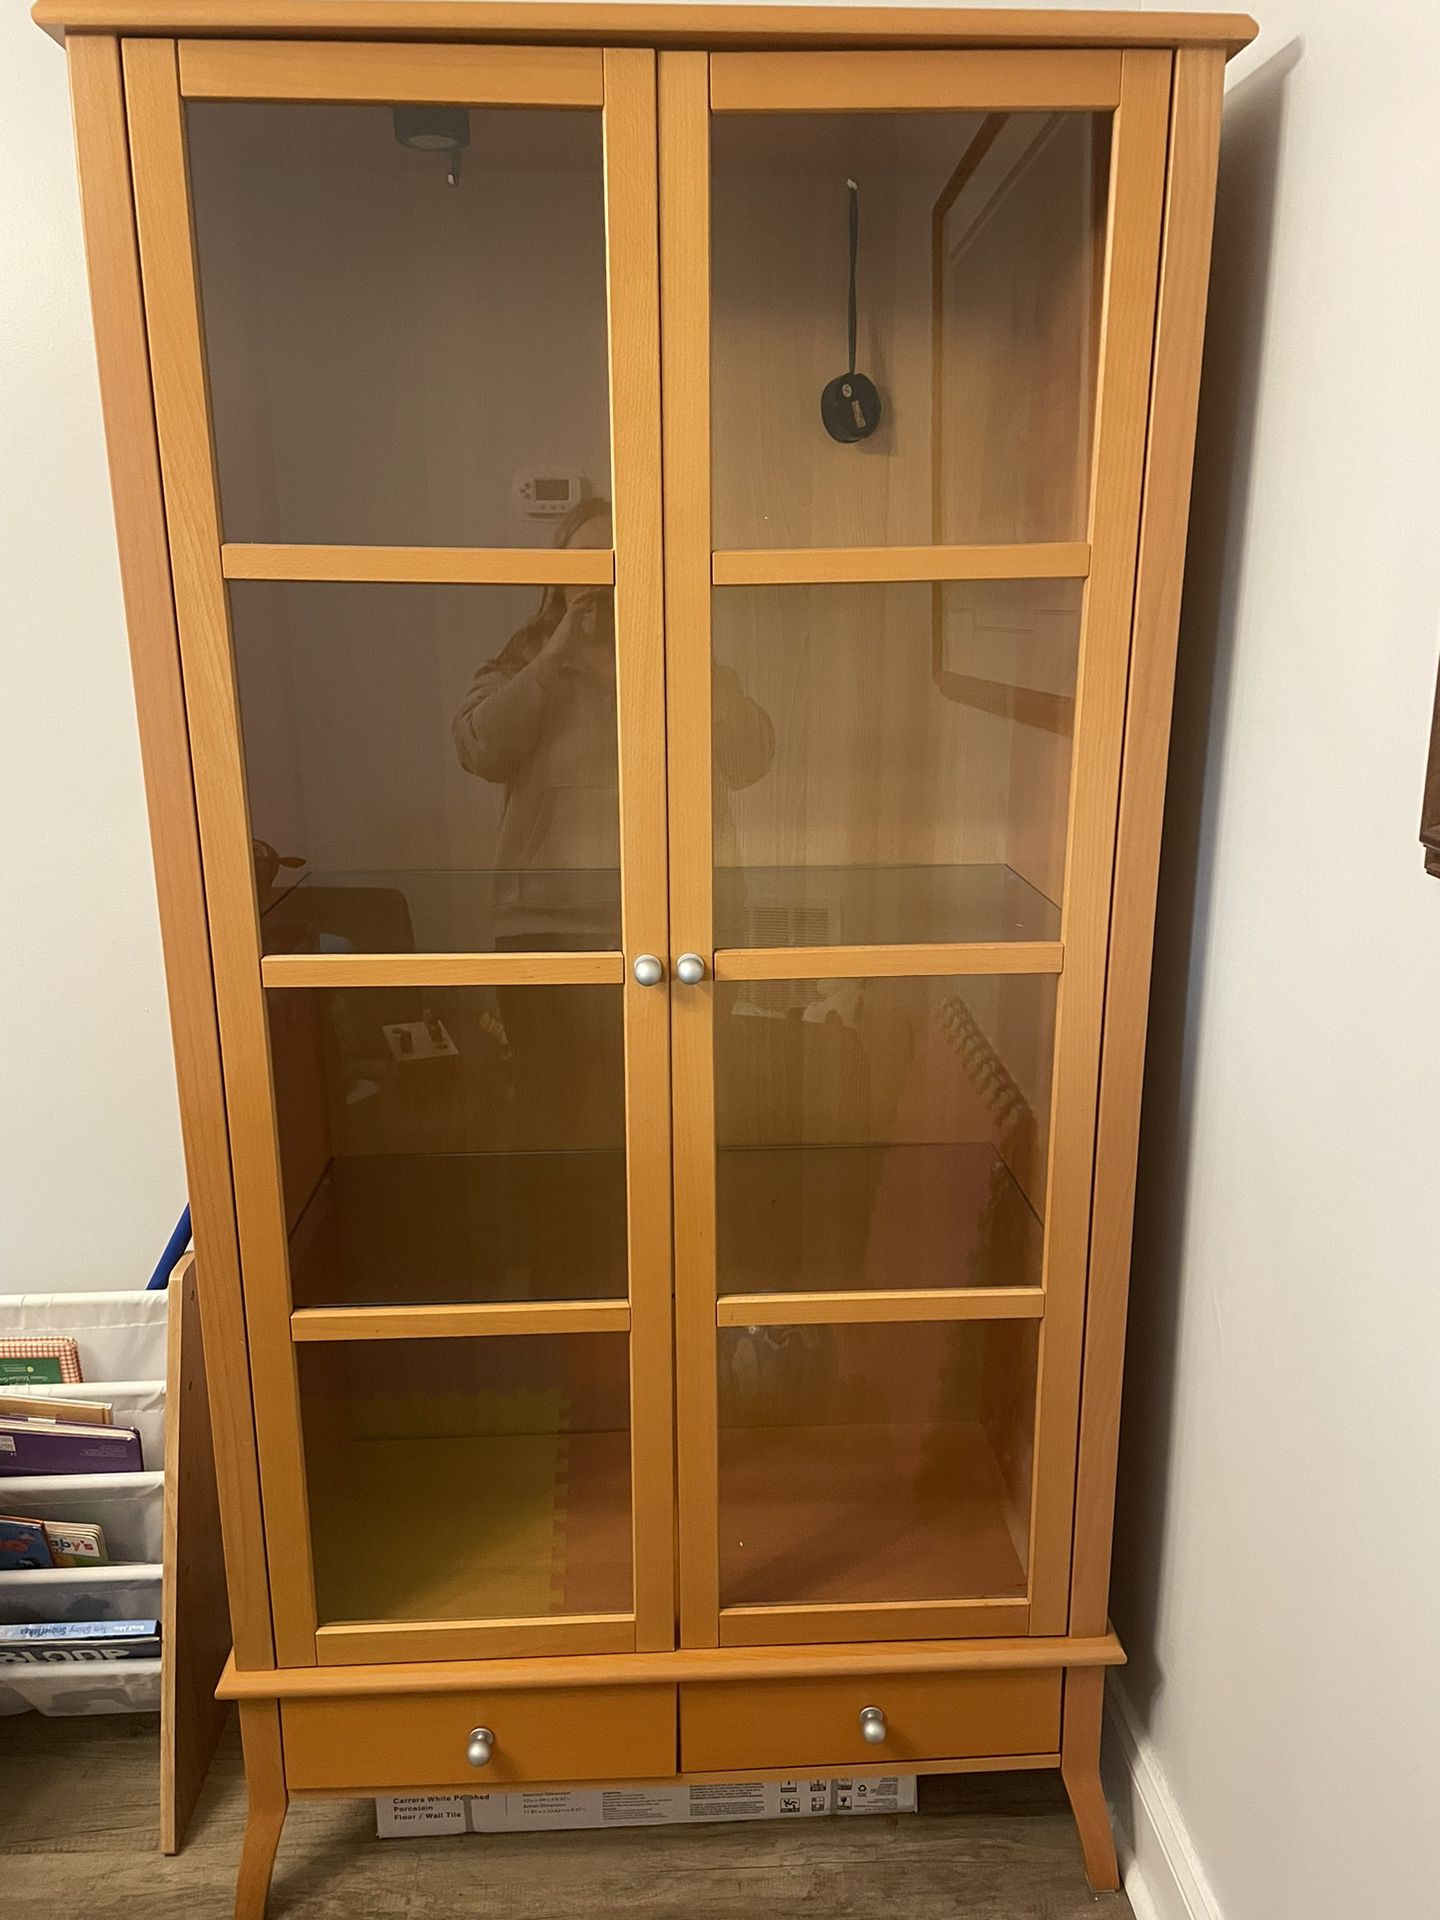 Kitchen Table/Display Glass Cabinet (will sell separately) 